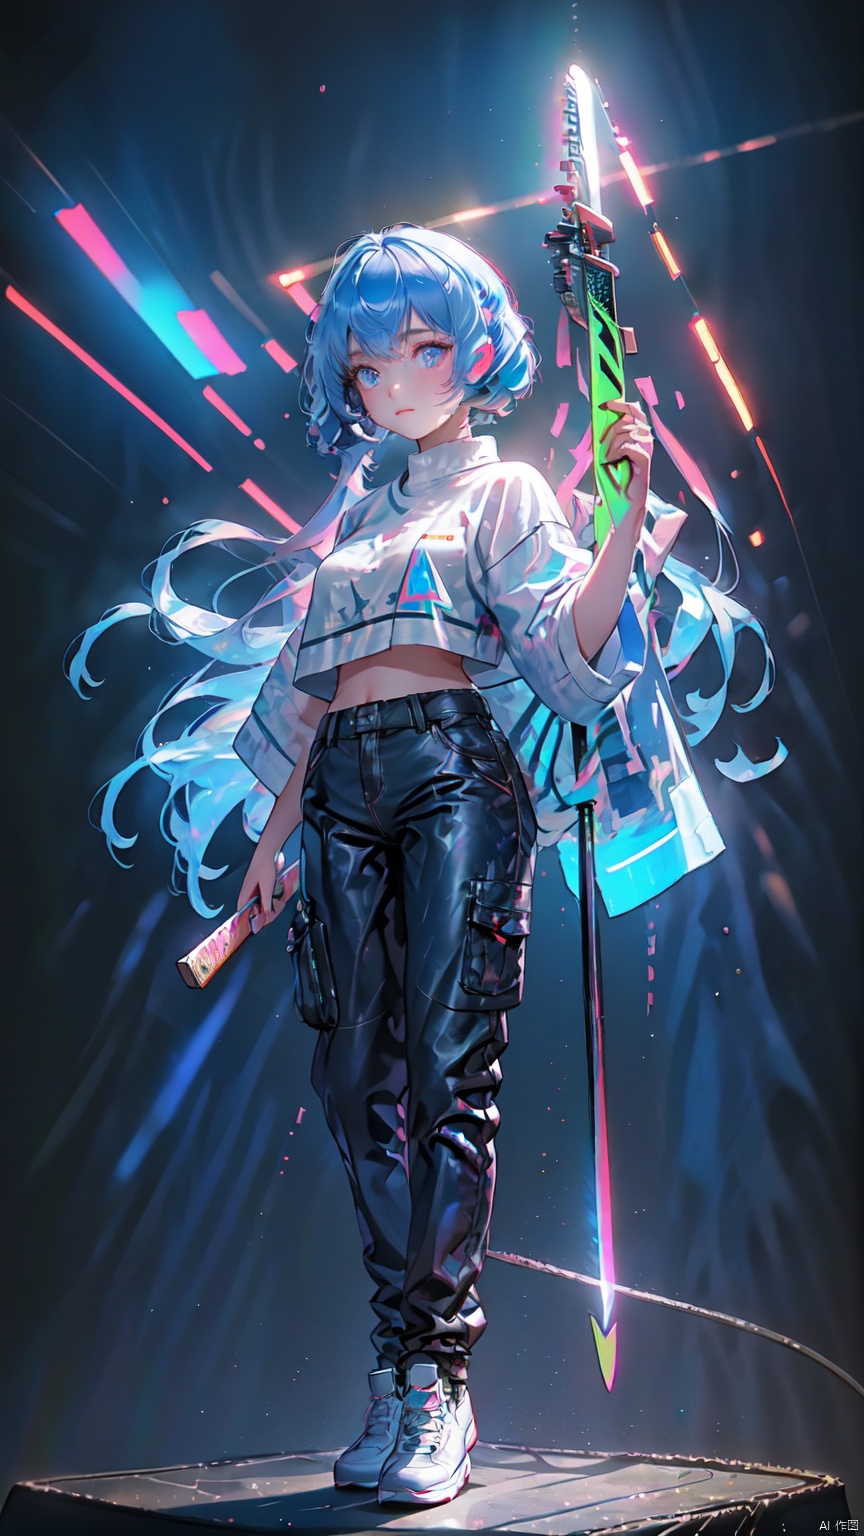  1 girl, loose clothes, (holding a samurai sword) (blue hair, blue eyes, three-dimensional facial features, big eyes, light makeup, lying silkworm), (loli height, standing on a mirrored stage, full body photo), (overhead view), (workwear pants, clothing - street hip-hop), (exquisite masterpiece), (holographic projection), (cyberpunk style), (mechanical modular background), (Luminous circuit) (Flashing neon light) (Blue illuminated background) (Background blurring treatment), Light-electric style, hand101, 1girl